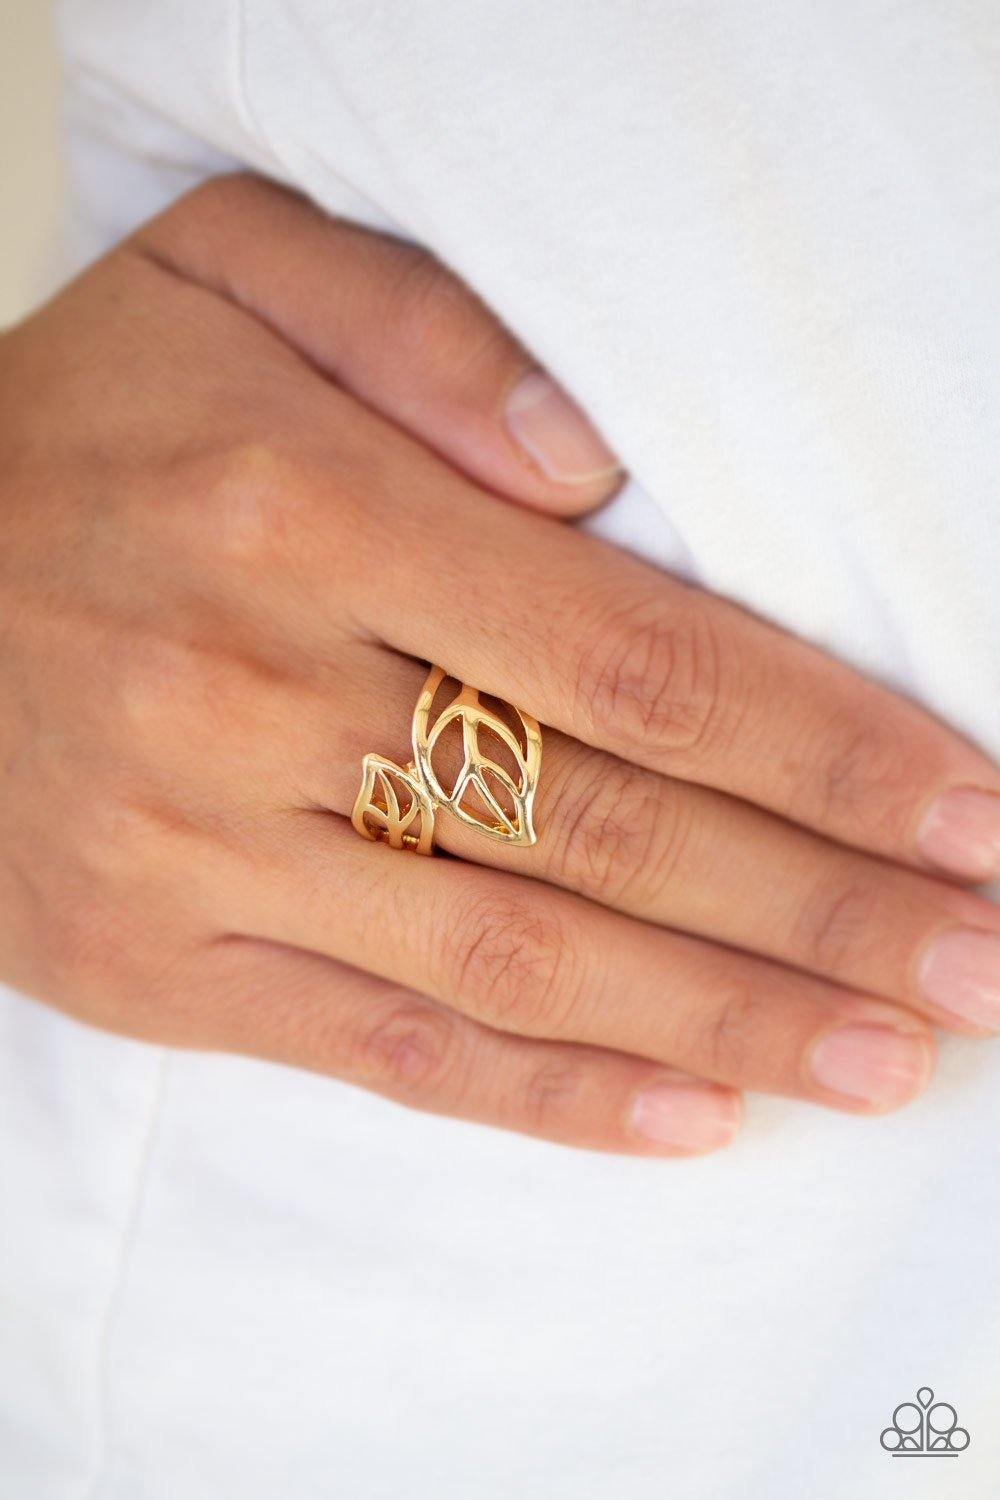 LEAF It All Behind - Gold Ring - Paparazzi Accessories - Sassysblingandthings